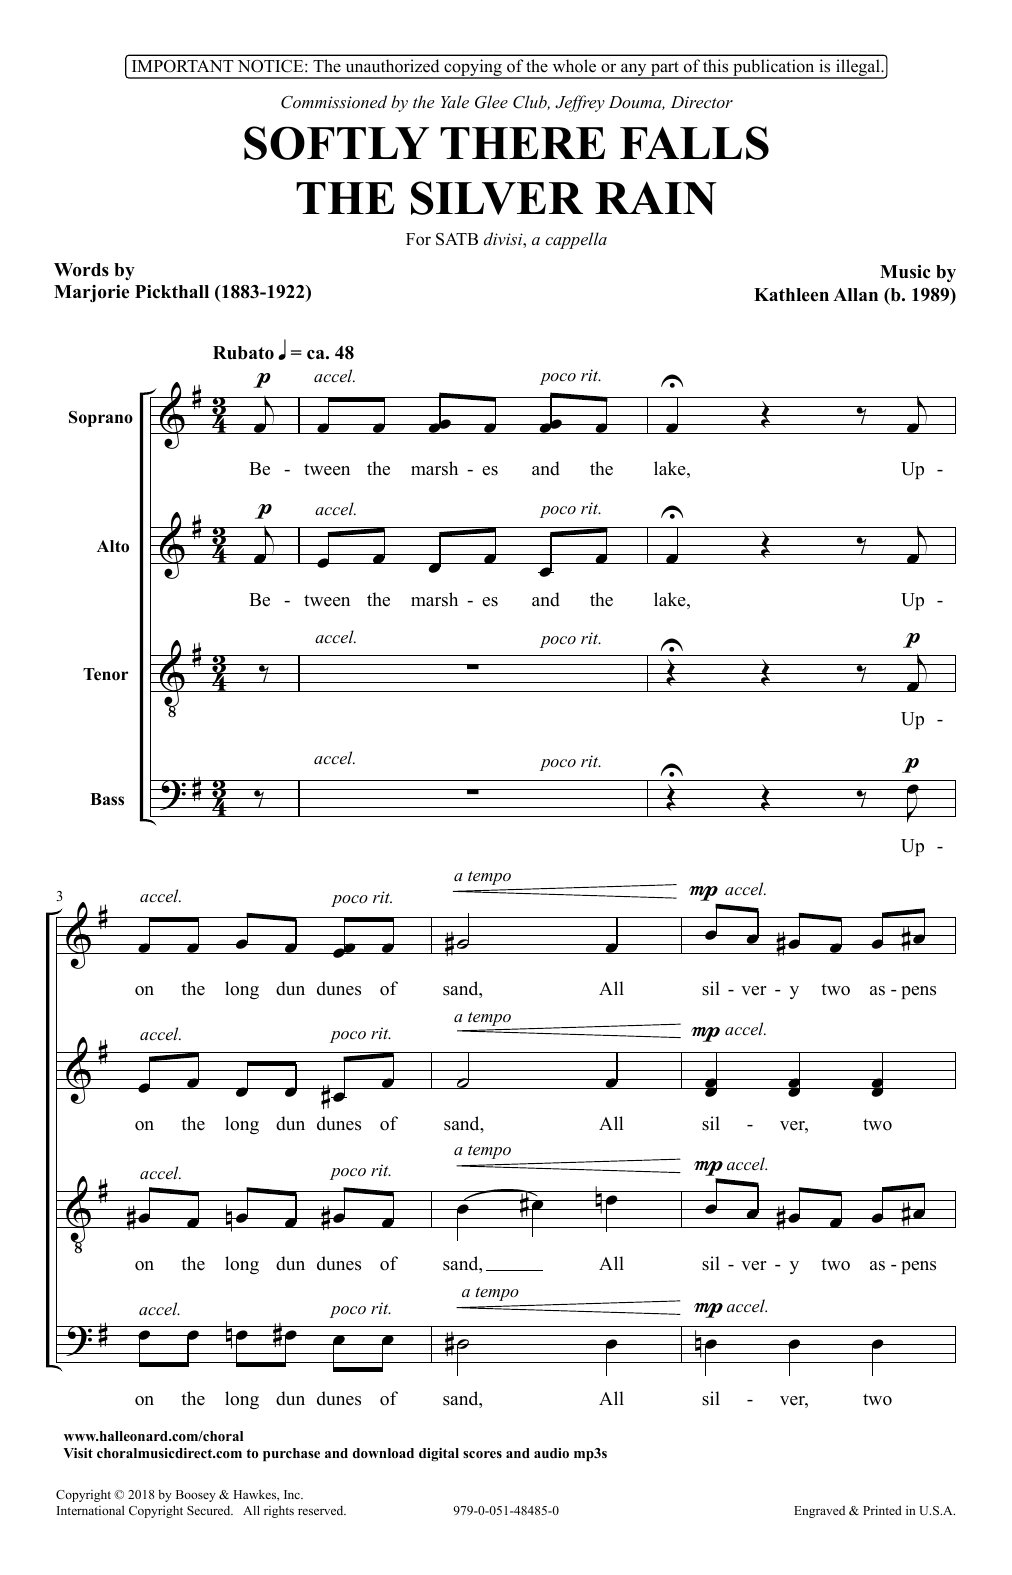 Download Kathleen Allan Softly There Falls The Silver Rain Sheet Music